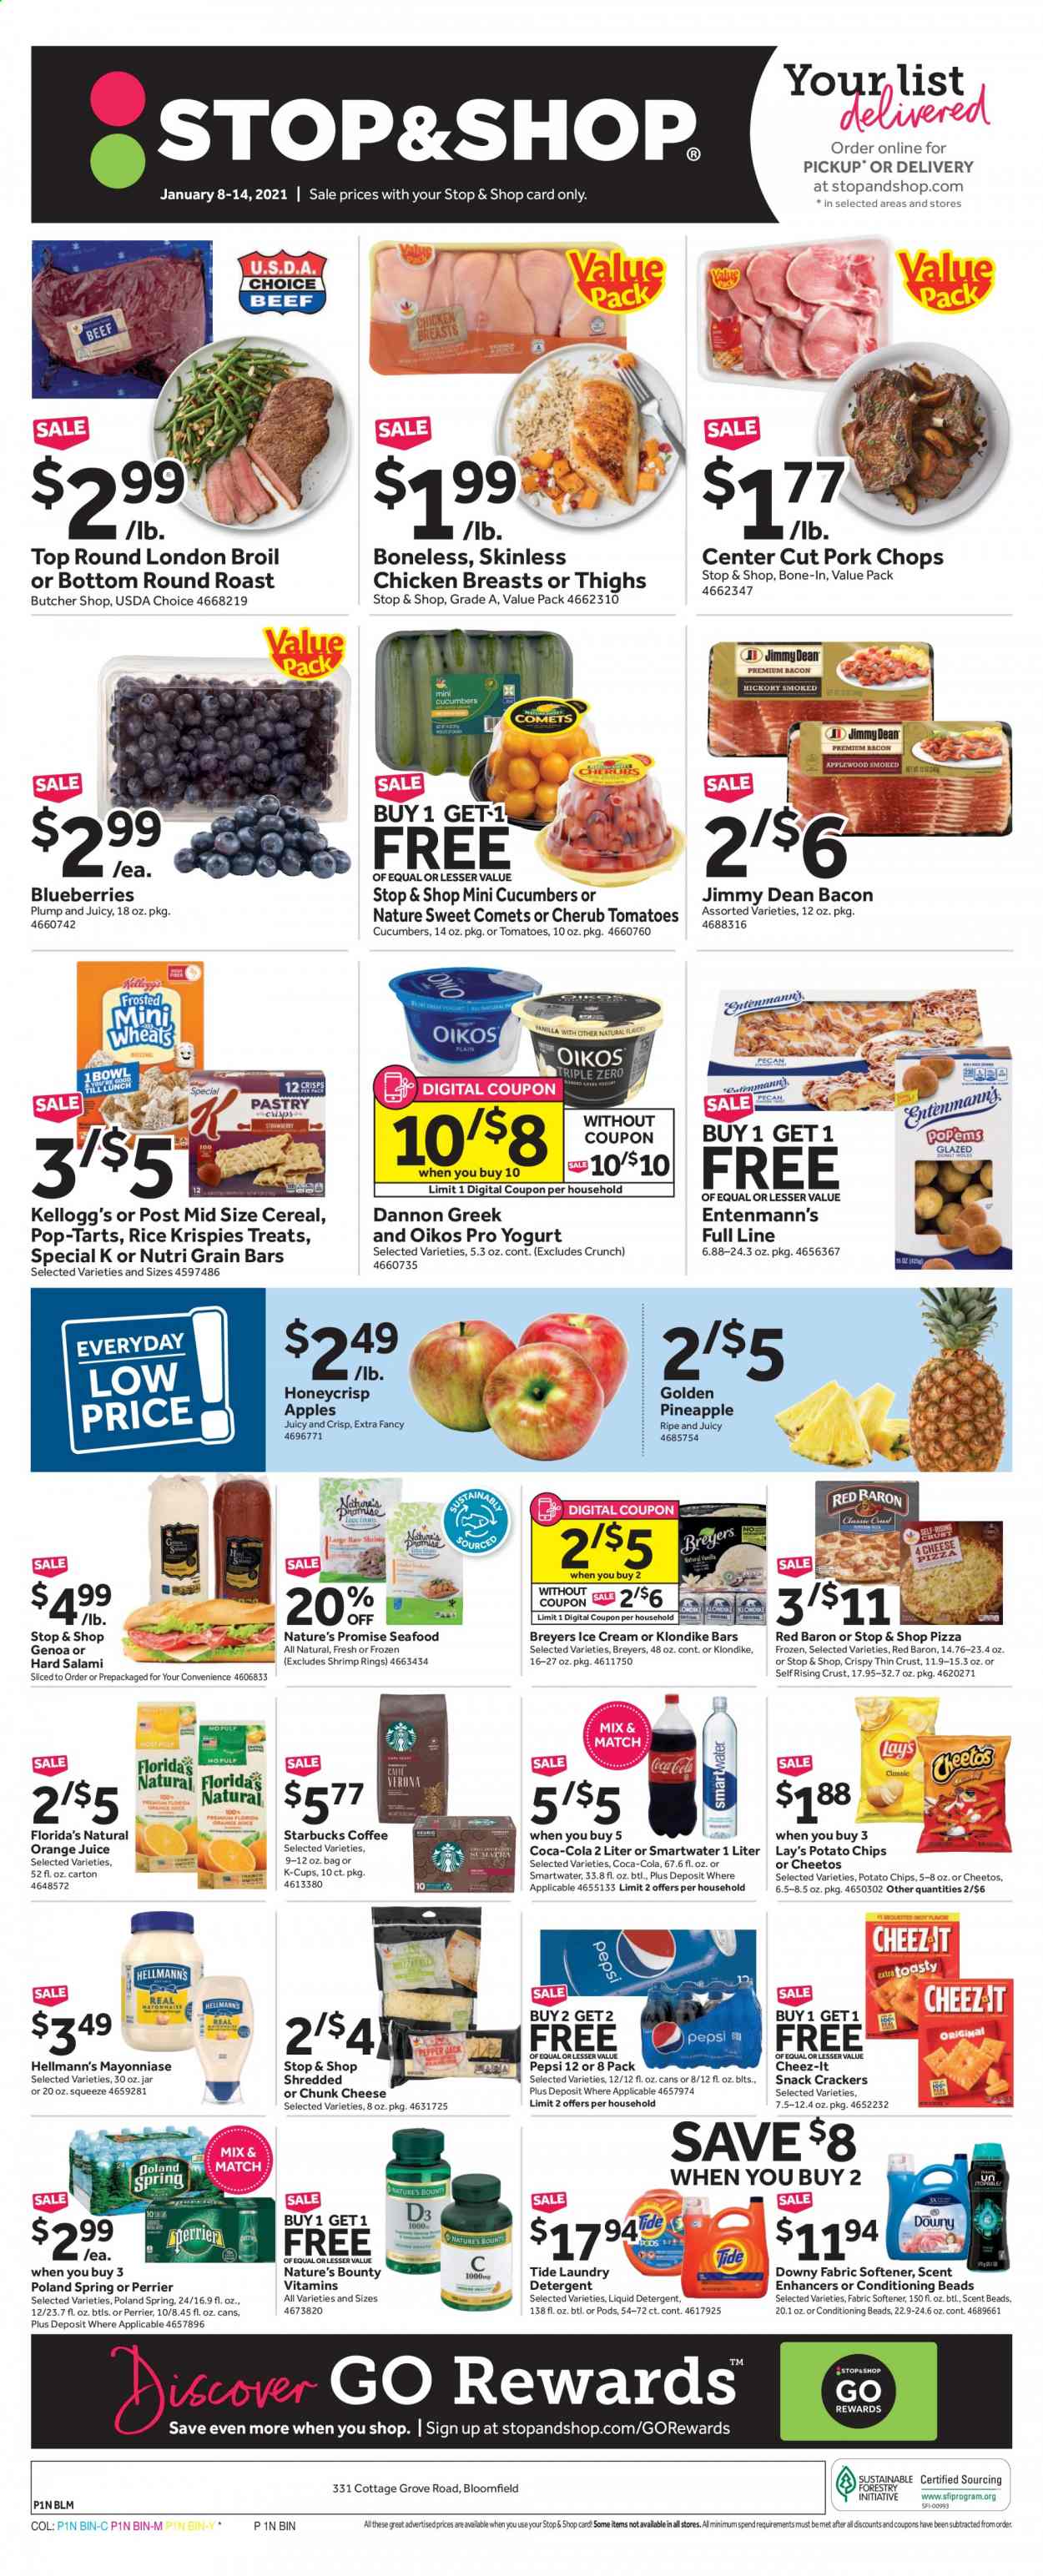 thumbnail - Stop & Shop Flyer - 01/08/2021 - 01/14/2021 - Sales products - blueberries, Nature’s Promise, Entenmann's, apples, chicken breasts, beef meat, round roast, pork chops, pork meat, seafood, shrimps, pizza, Jimmy Dean, bacon, salami, cheese, chunk cheese, yoghurt, Oikos, Dannon, Hellmann’s, ice cream, Red Baron, Bounty, crackers, Kellogg's, Pop-Tarts, Florida's Natural, potato chips, Cheetos, snack, Lay’s, Cheez-It, cereals, Rice Krispies, Nutri-Grain, Coca-Cola, Pepsi, orange juice, juice, Perrier, Starbucks, coffee capsules, K-Cups, Tide, fabric softener, laundry detergent, conditioning beads, liquid detergent, Nature's Bounty. Page 1.